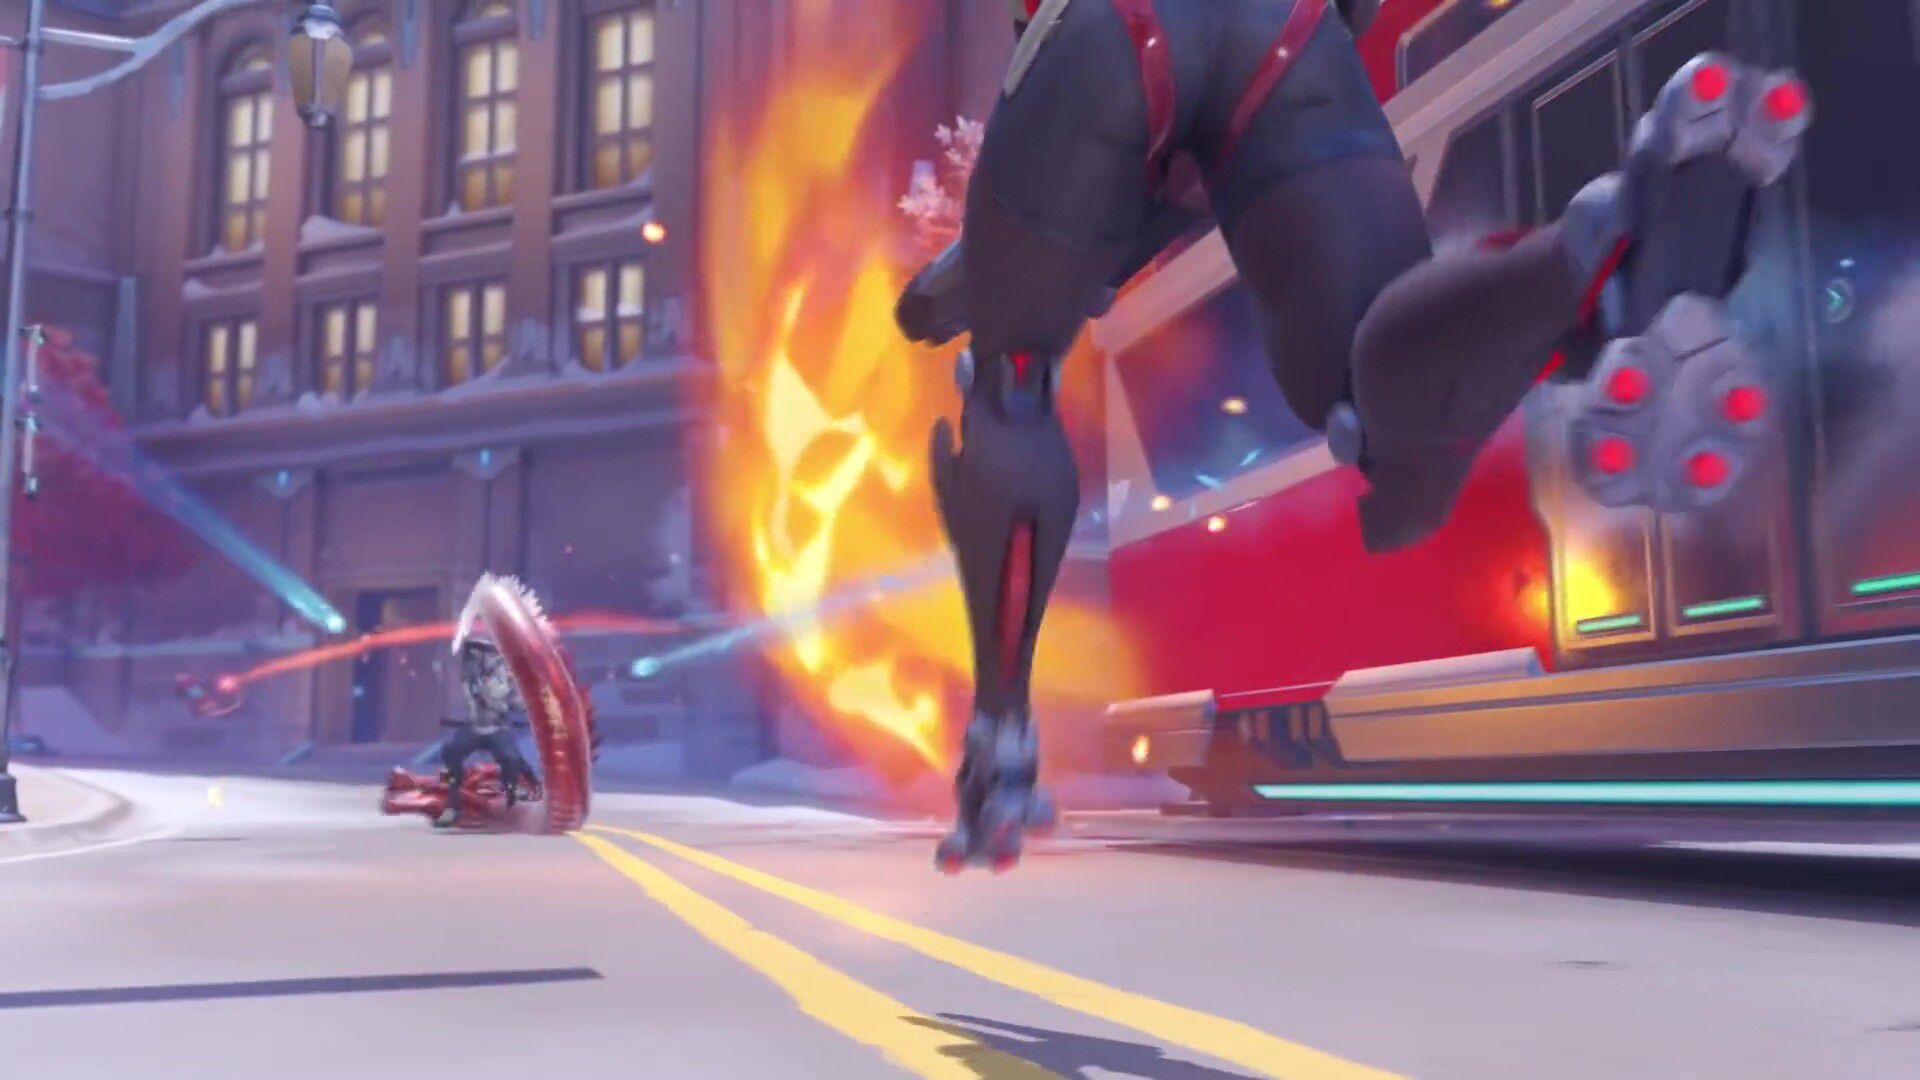 "Sojoan", a new character with a powerful rocket-equipped thigh with a whip whip of the Overwatch 2 machine 15